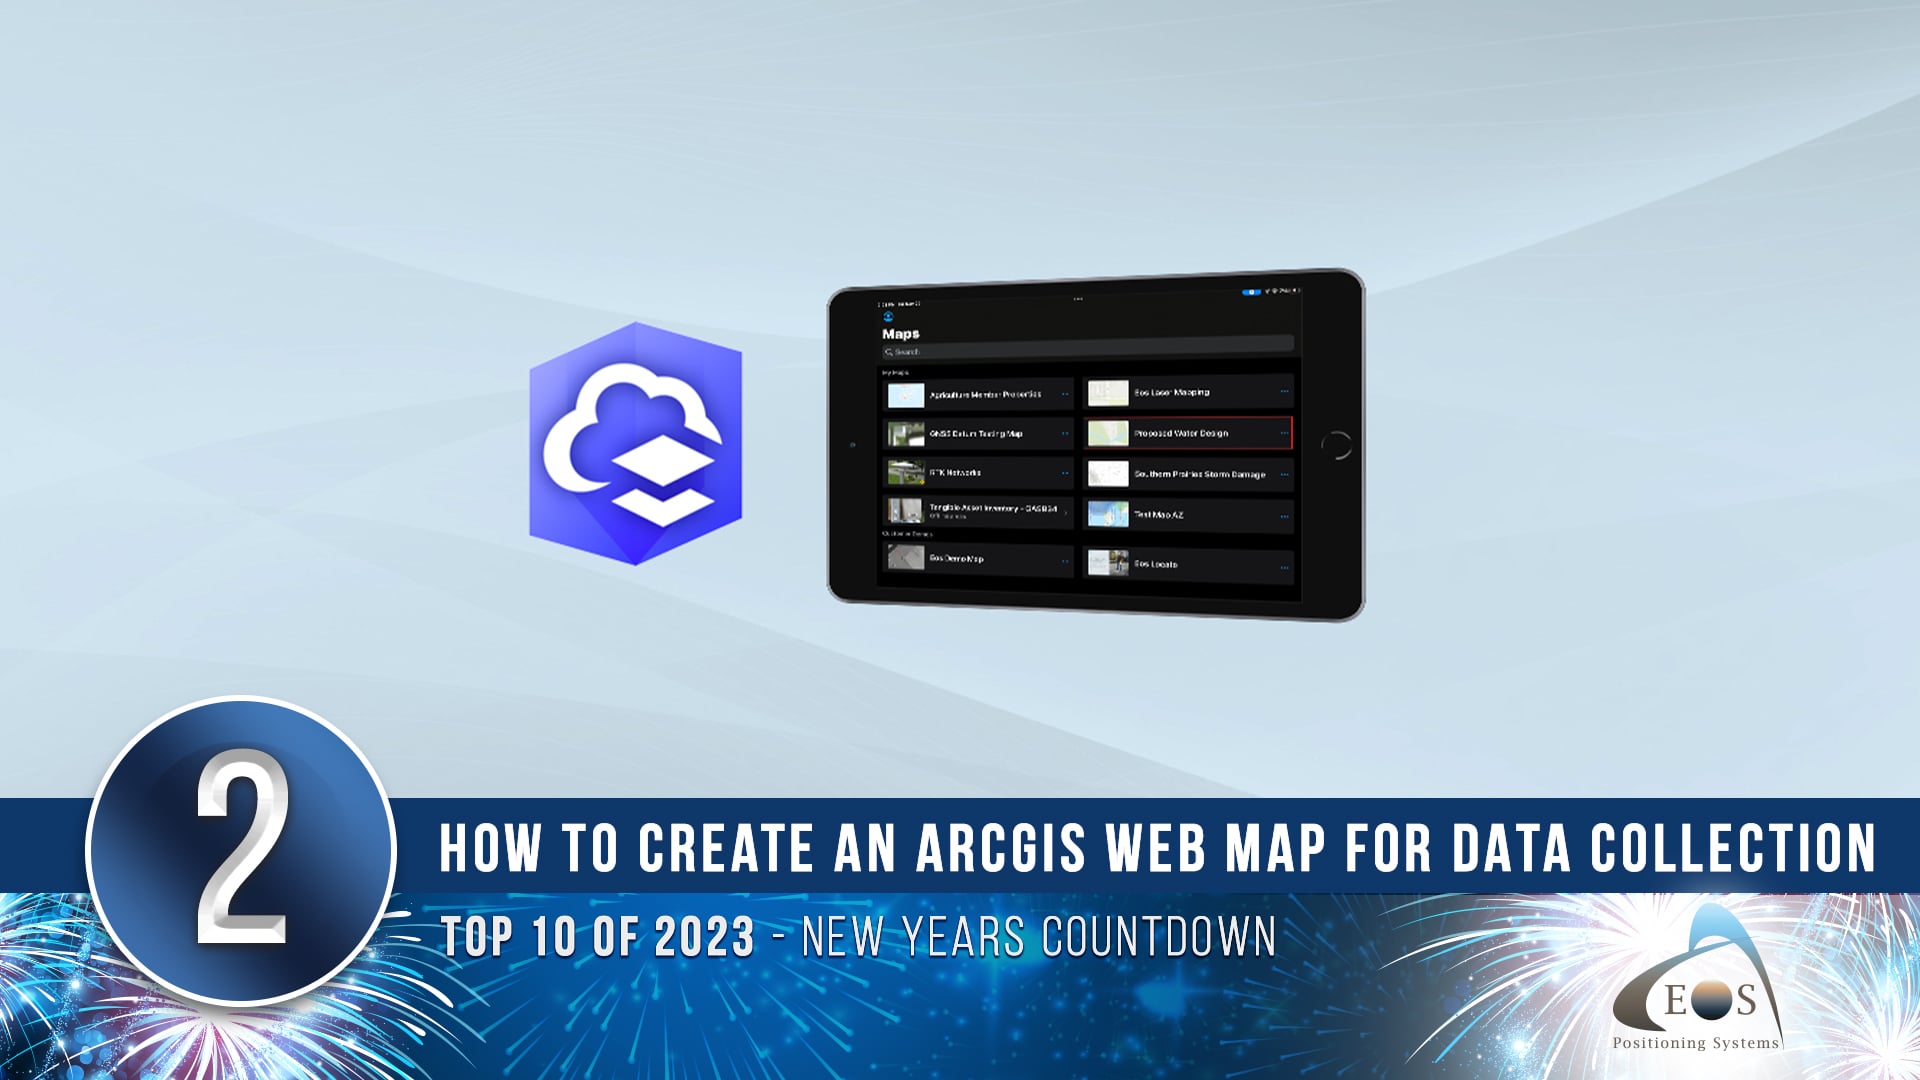 2 - How to Create an ArcGIS Web Map for High Accuracy Data Collection Top 10 of 2023